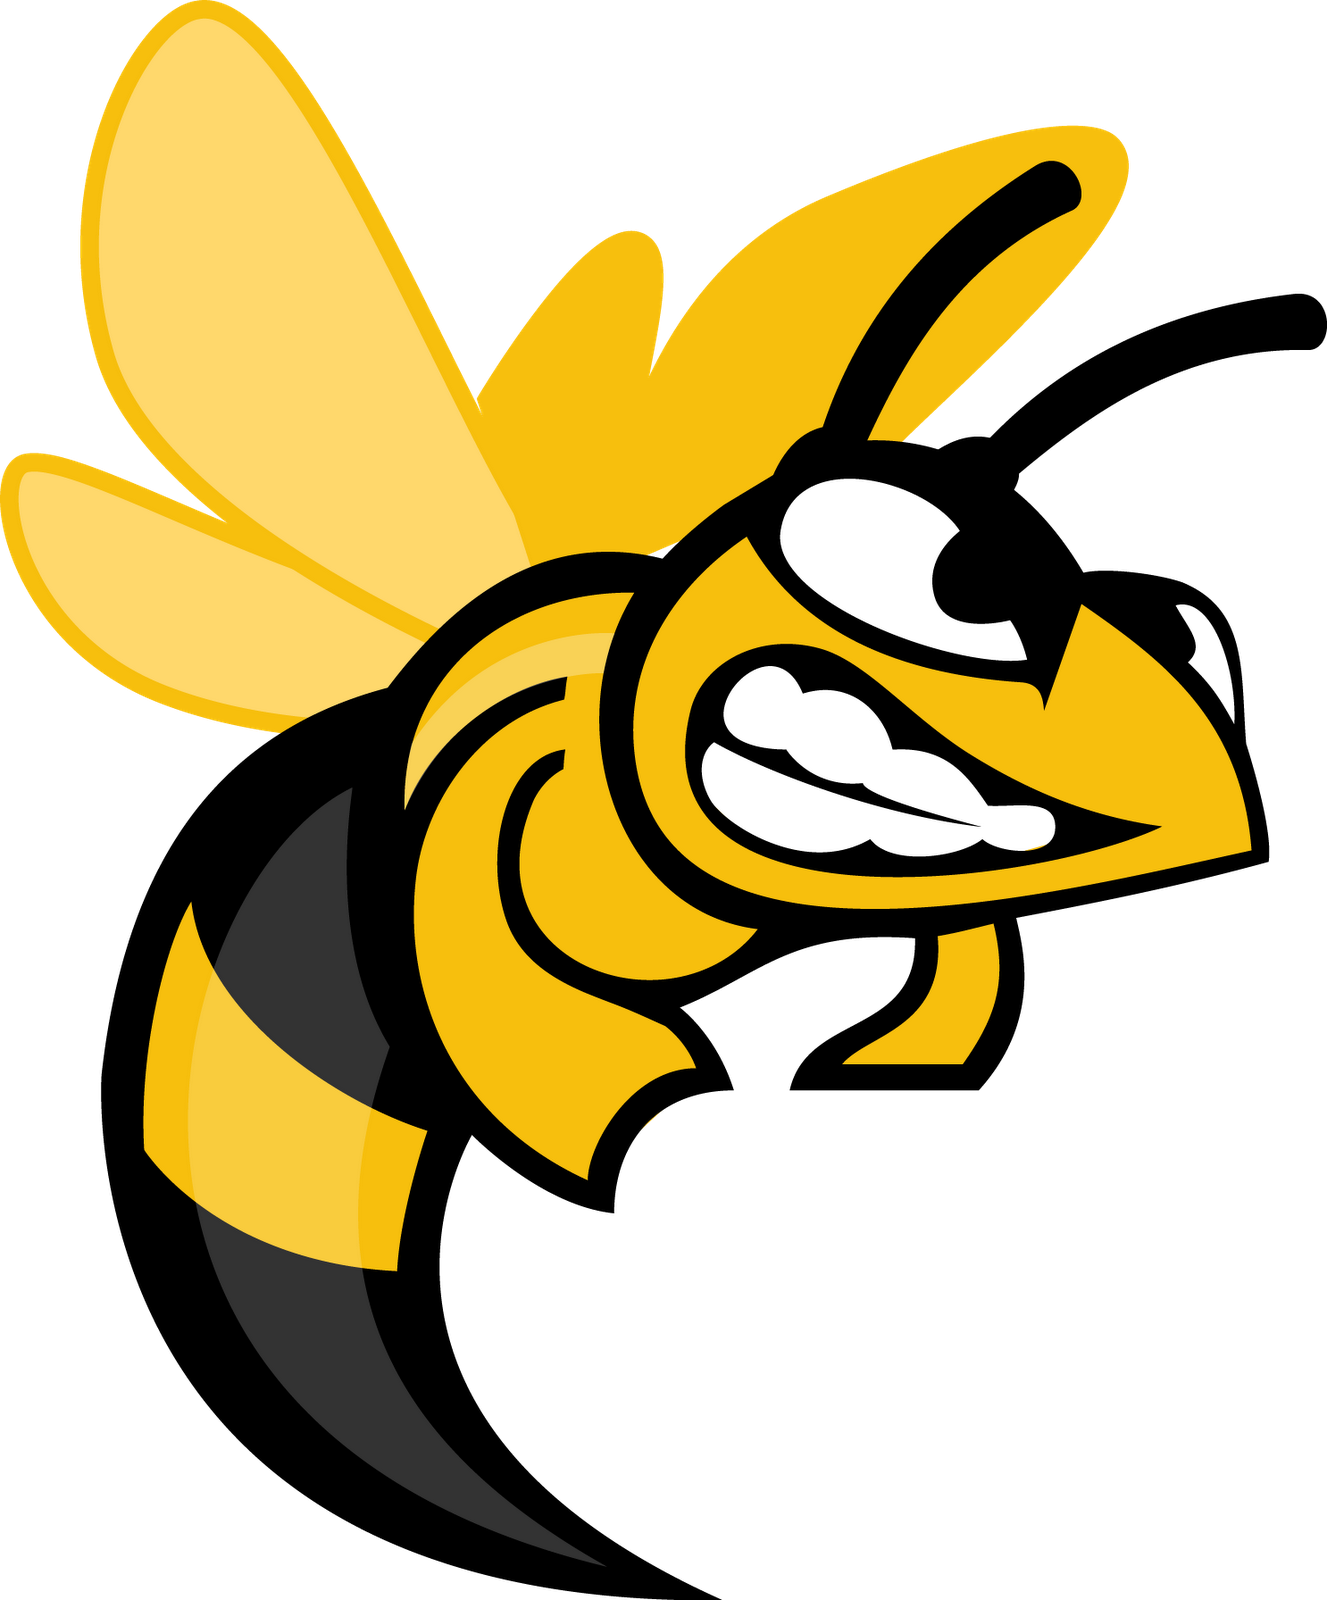 Hornet Logo Clipart - Cliparts and Others Art Inspiration